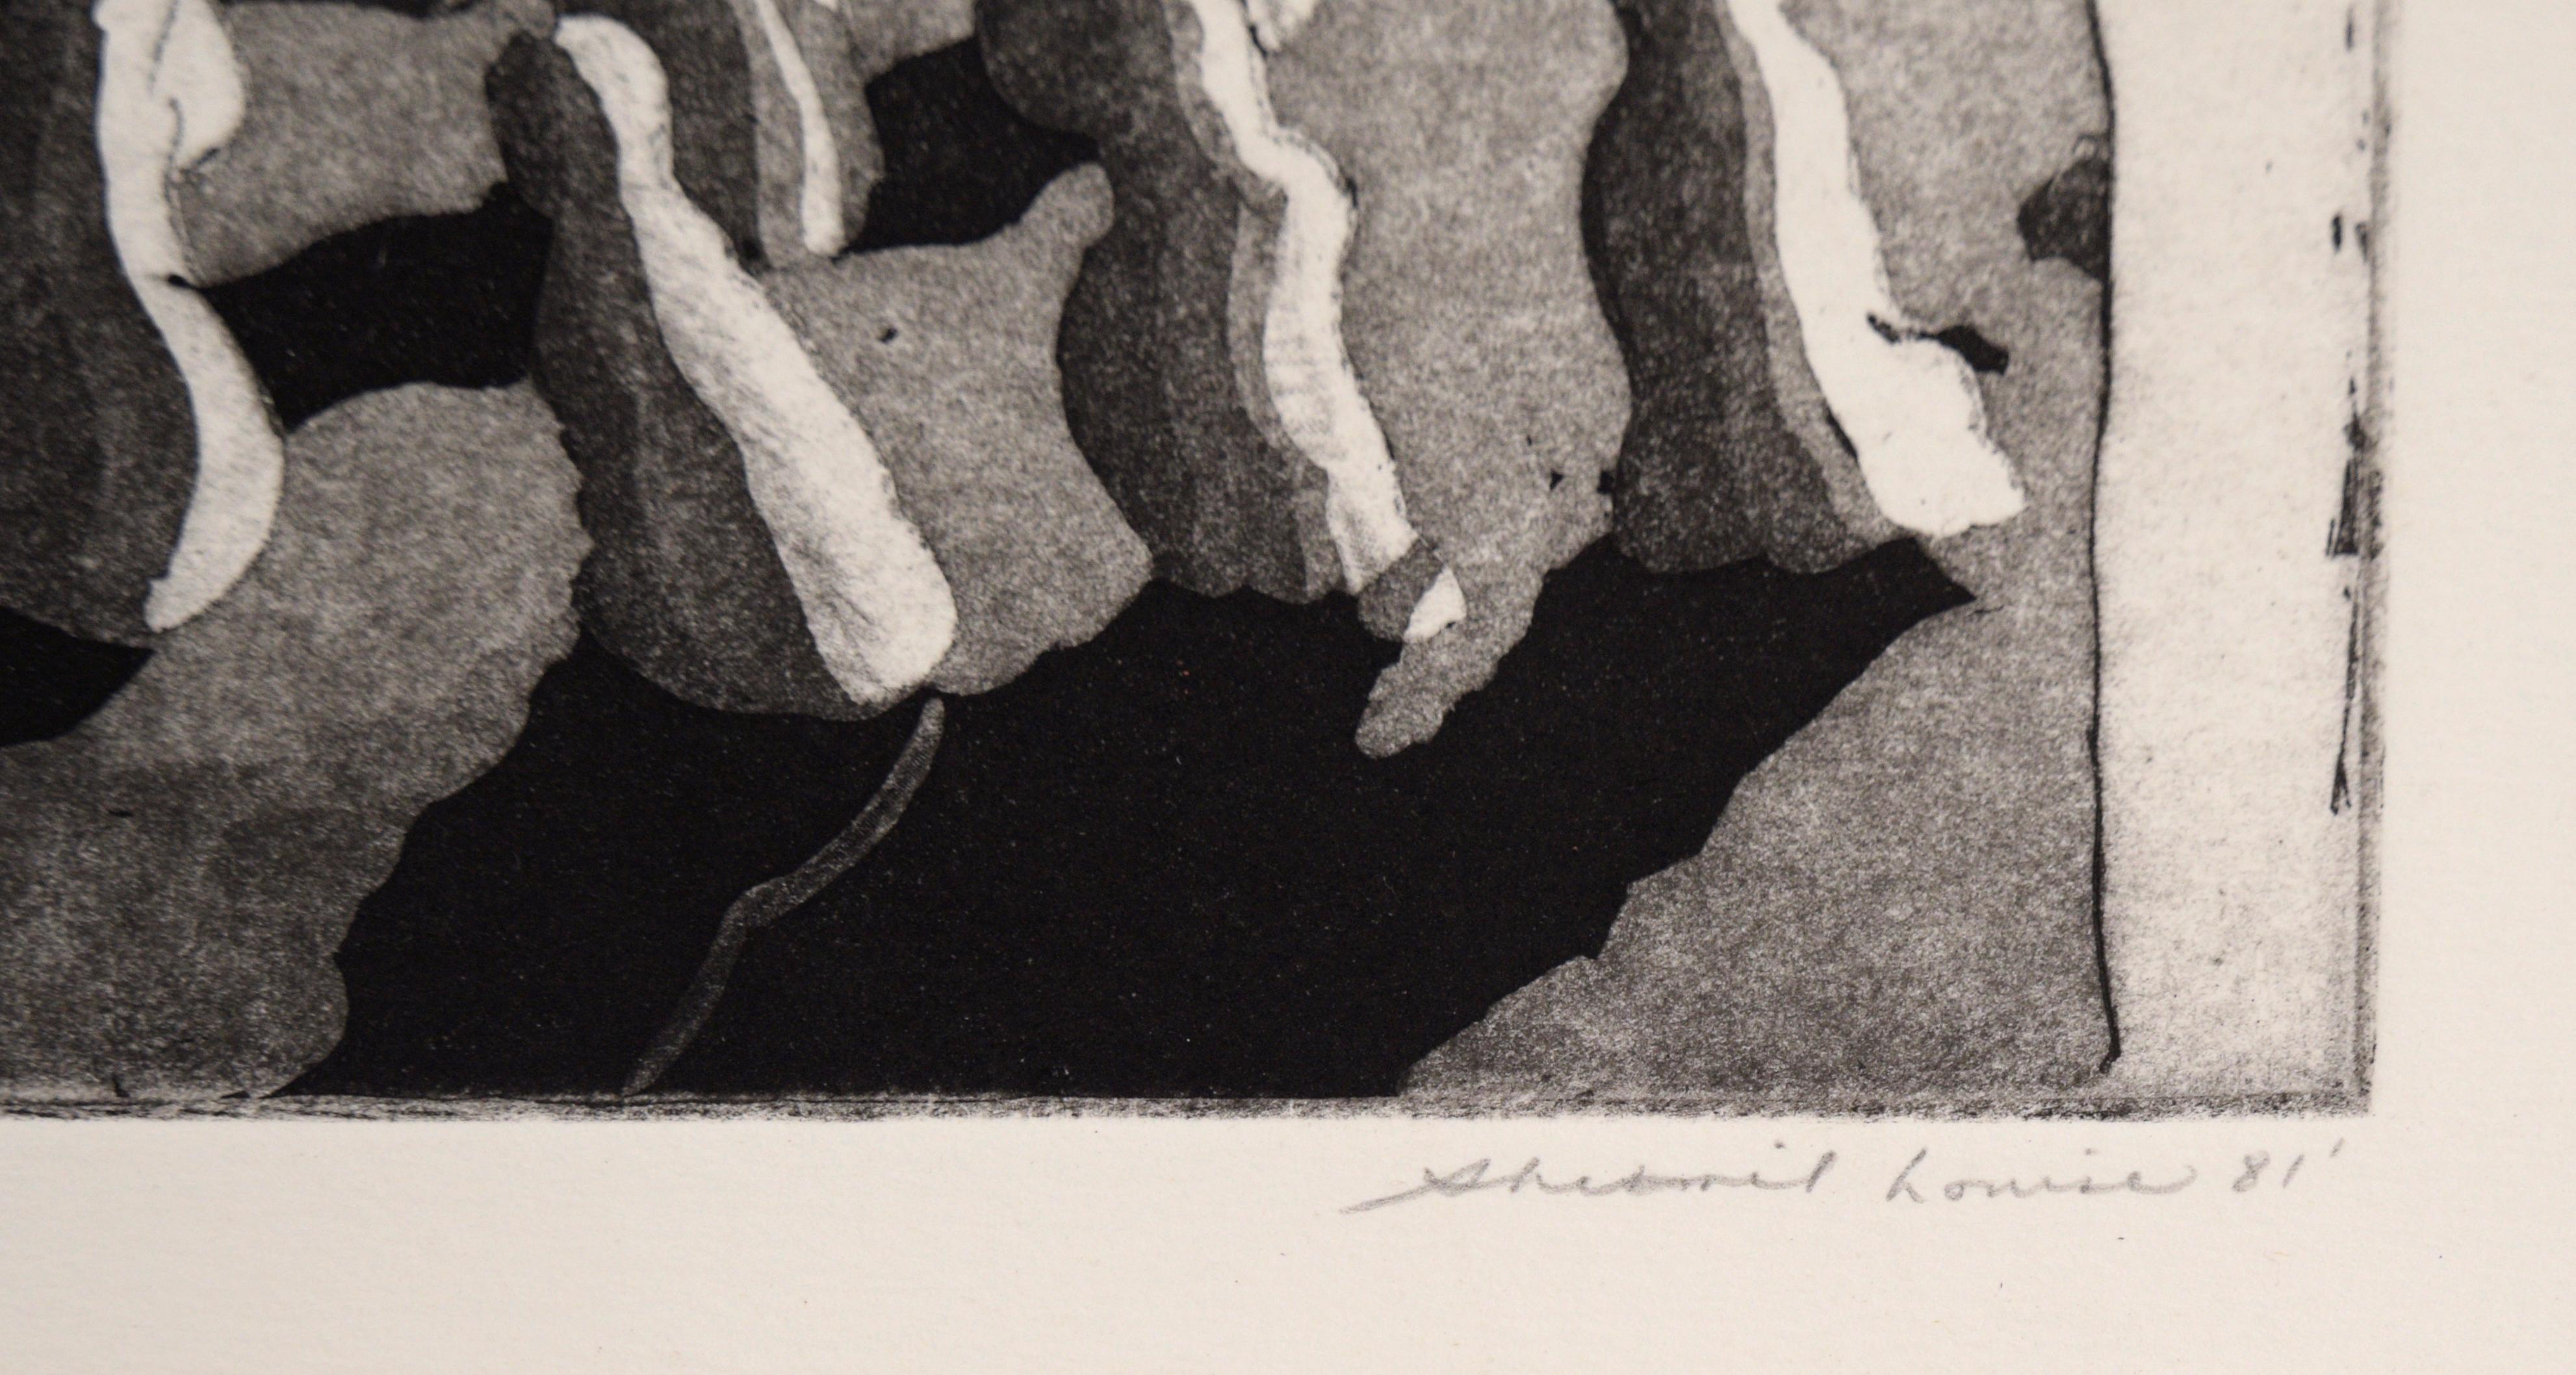 The Procession - Abstracted Figurative Lithograph in Ink on Paper 2